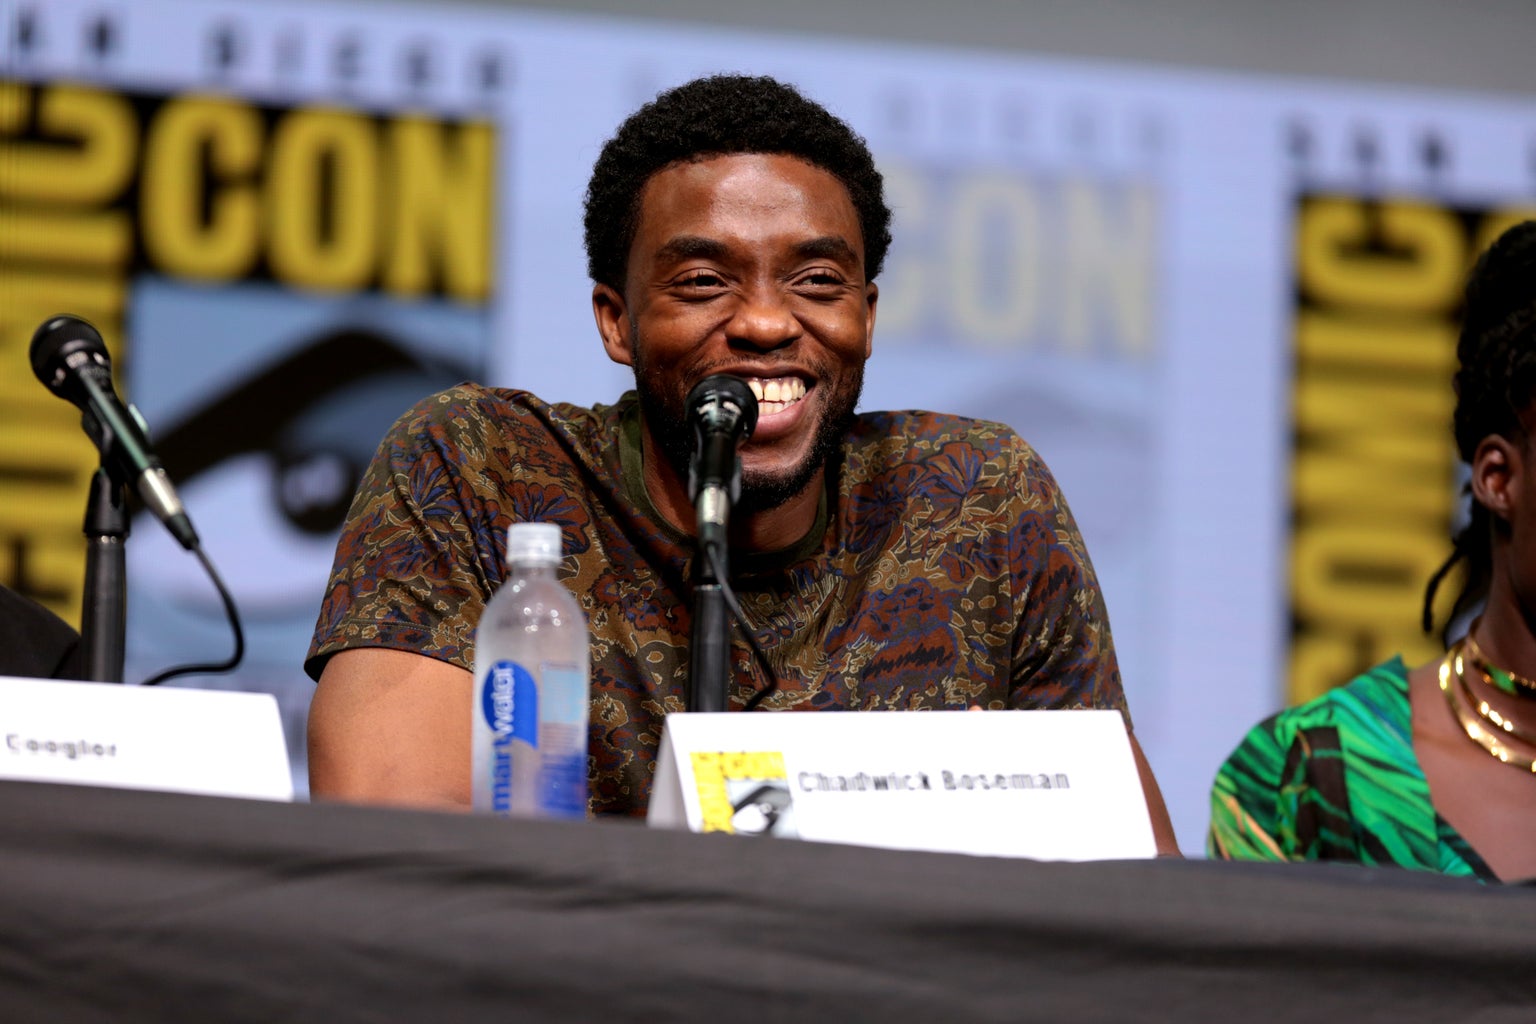 Chadwick Boseman speaking at the 2017 San Diego Comic Con International, for \